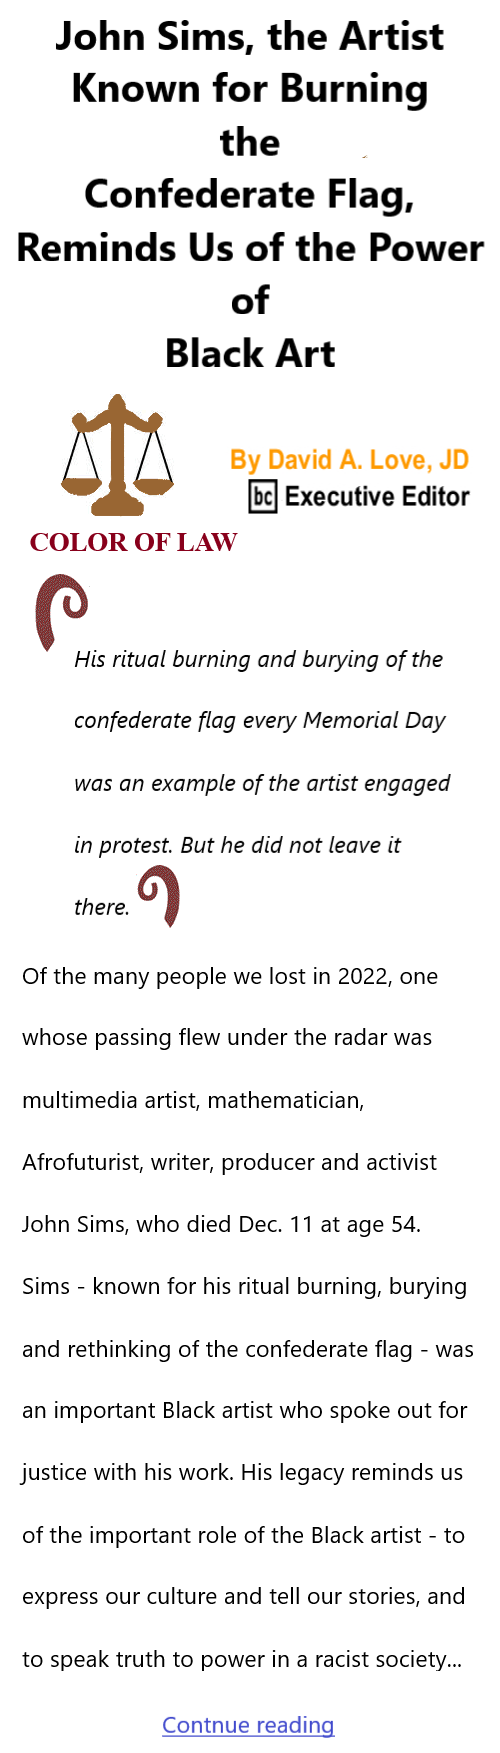 BlackCommentator.com Issue 941: John Sims, the Artist Known for Burning the Confederate Flag, Reminds Us of the Power of Black Art - Color of Law By David A. Love, JD, BC Executive Editor